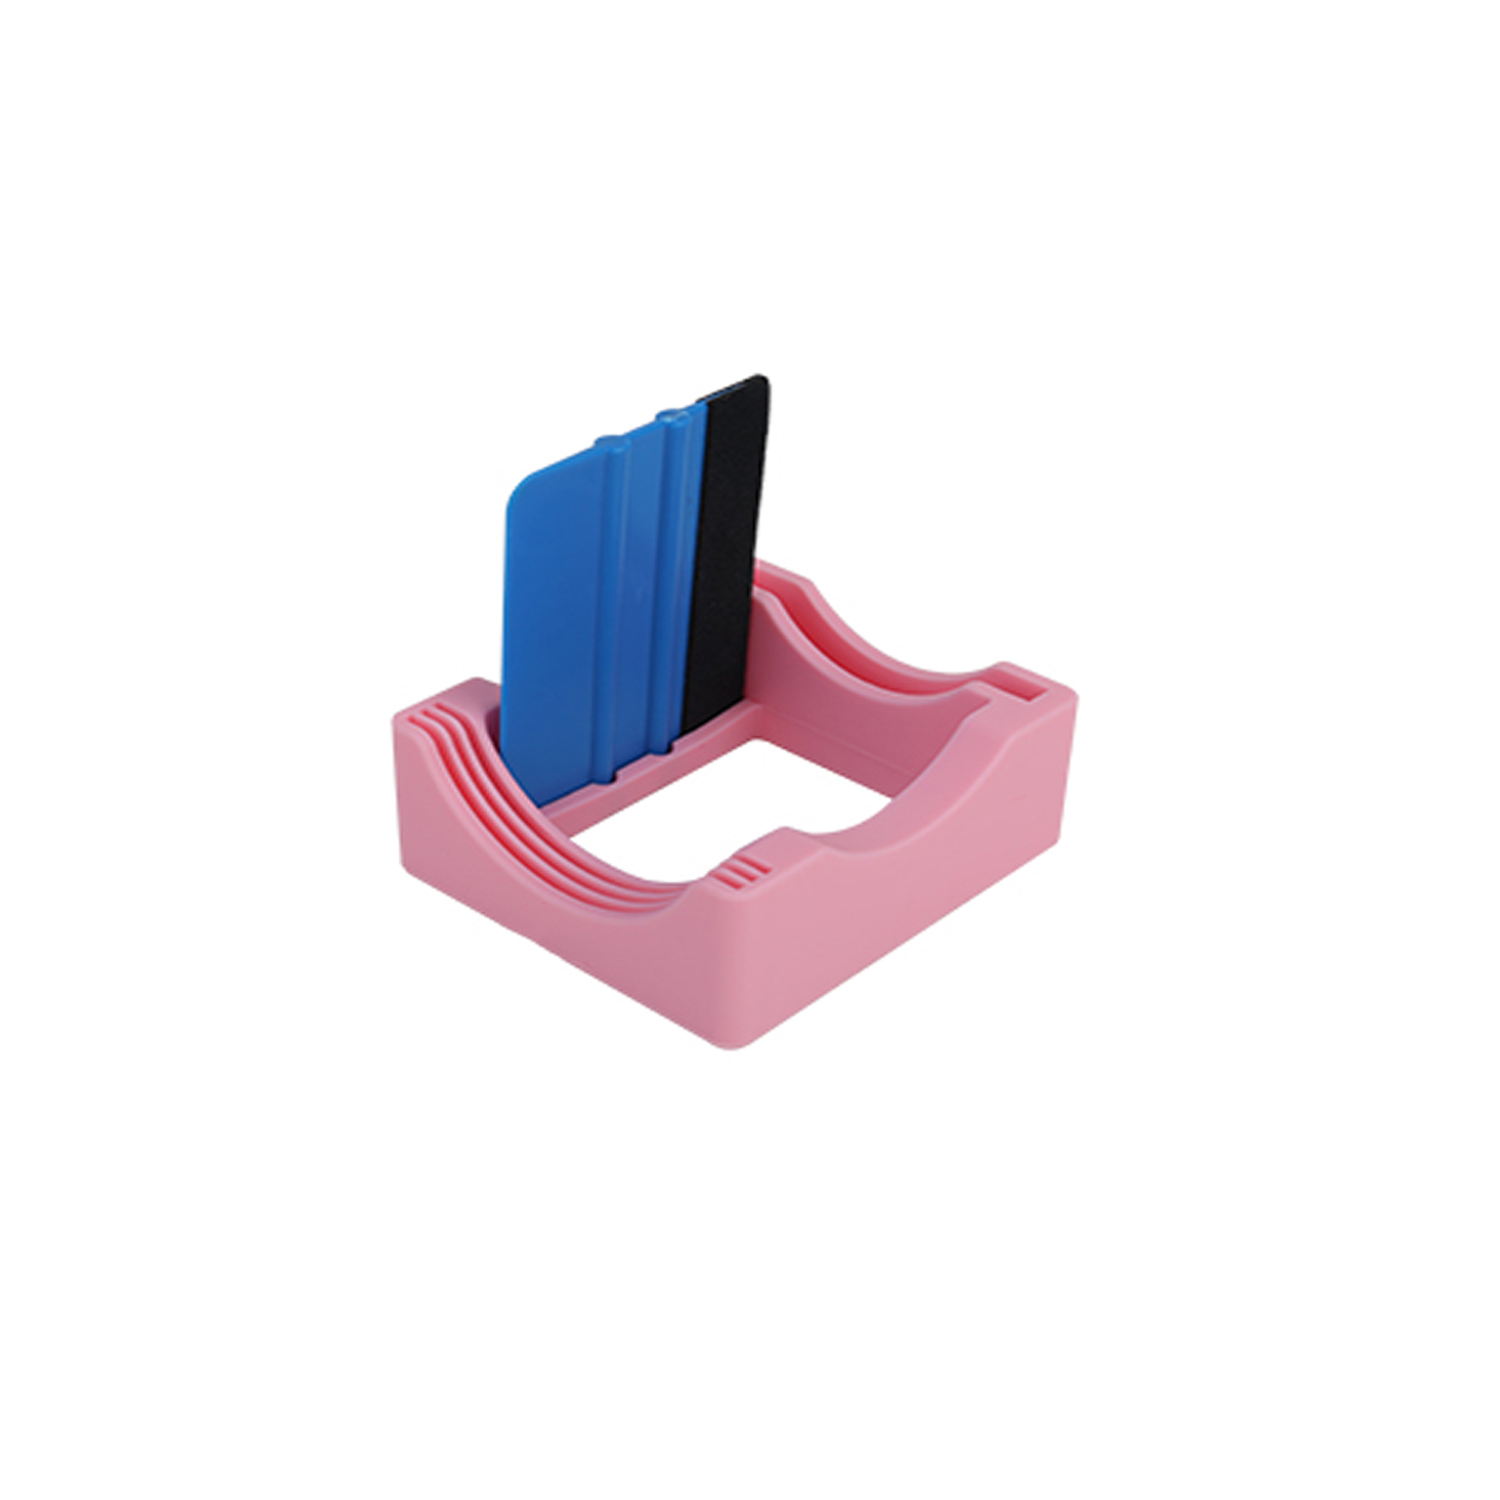 Silicone Cup Cradle for Tumblers with Built in Slot, Tumbler